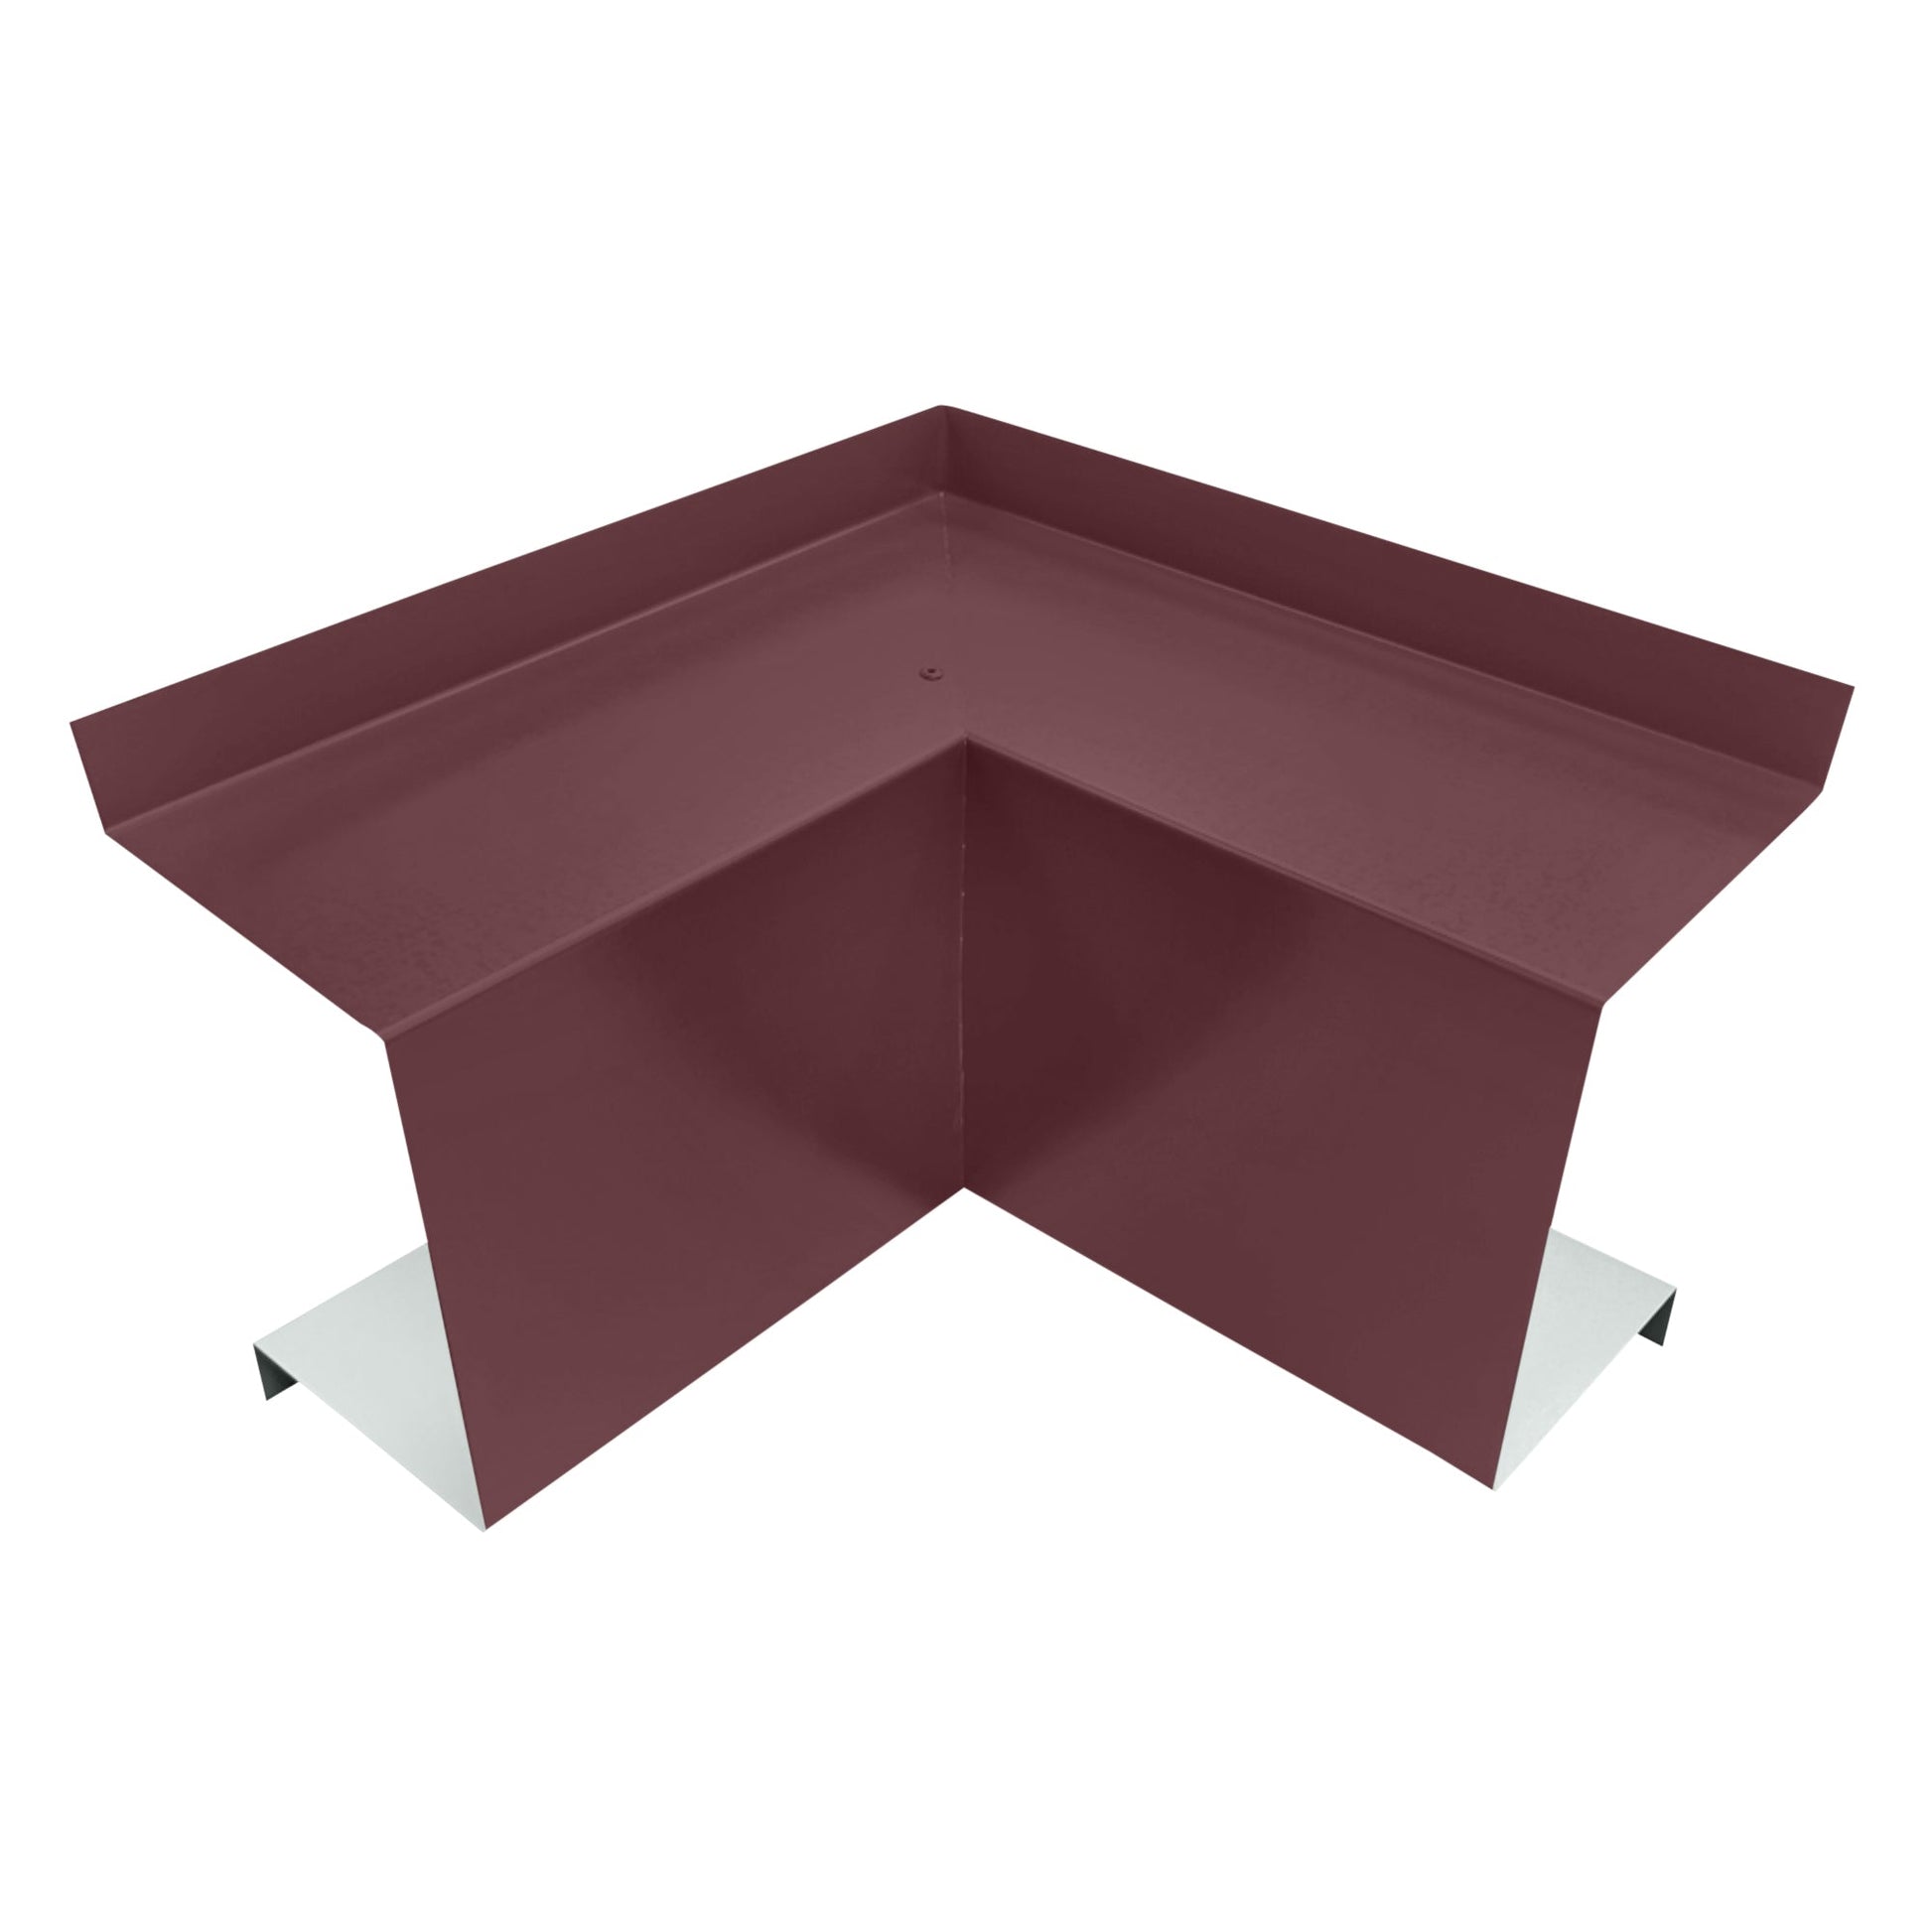 Image of a maroon Perma Cover Residential Series - Line Set Cover Inside Corner Elbows - Premium Quality. The object is shaped to form a 90-degree angle, with one side bent upwards and the other side extending horizontally. Often used in construction for sealing and protecting building corners from water penetration, it can also complement HVAC installations seamlessly.